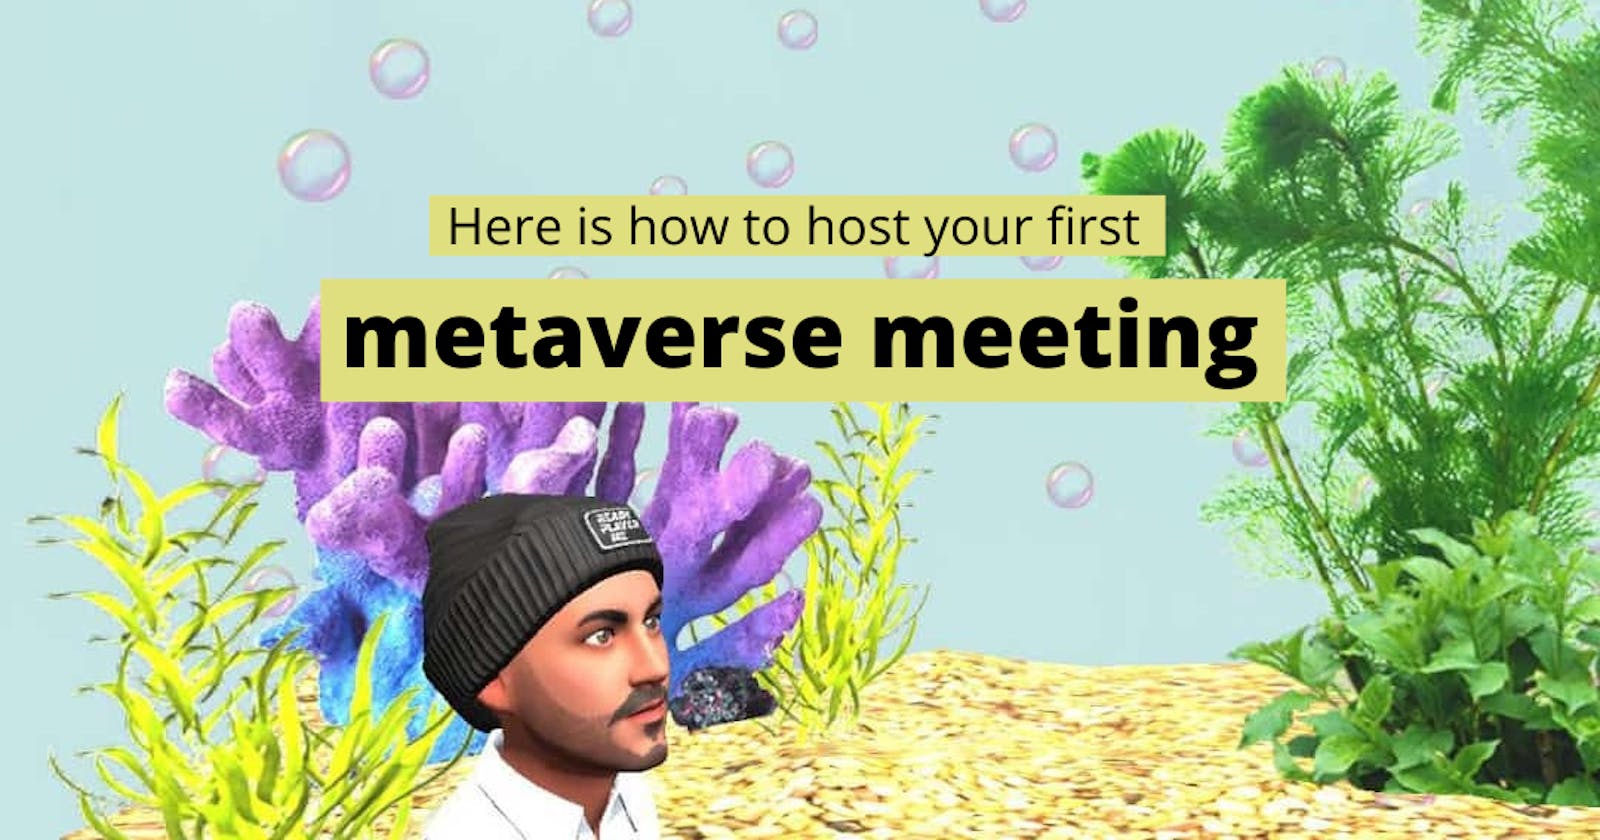 Host your first metaverse meeting without any VR device.